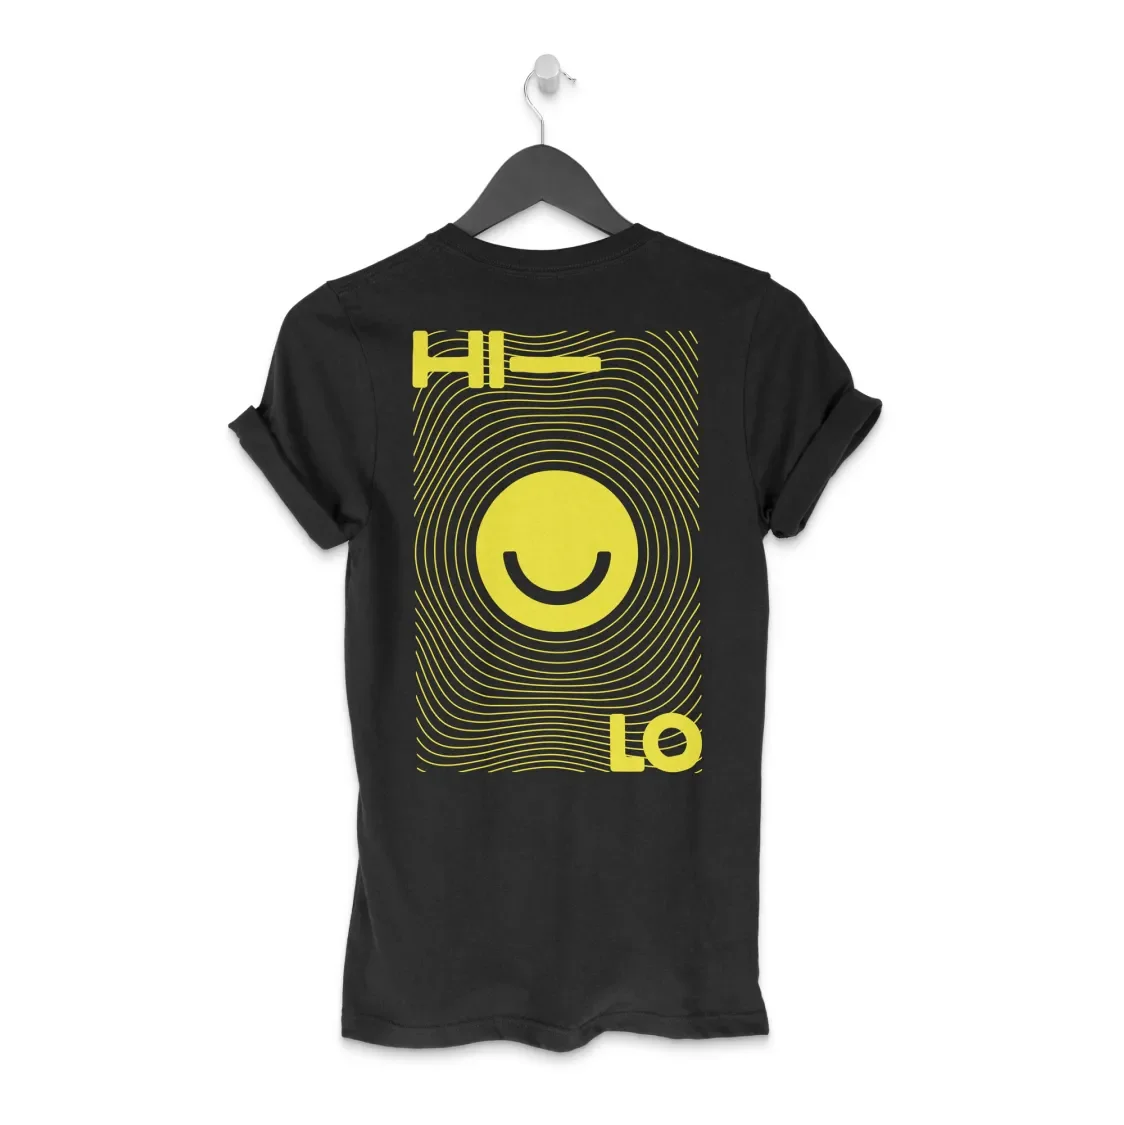 Back of a Hi-Lo tee featuring the smiley logo with a rippling pattern emanating from it